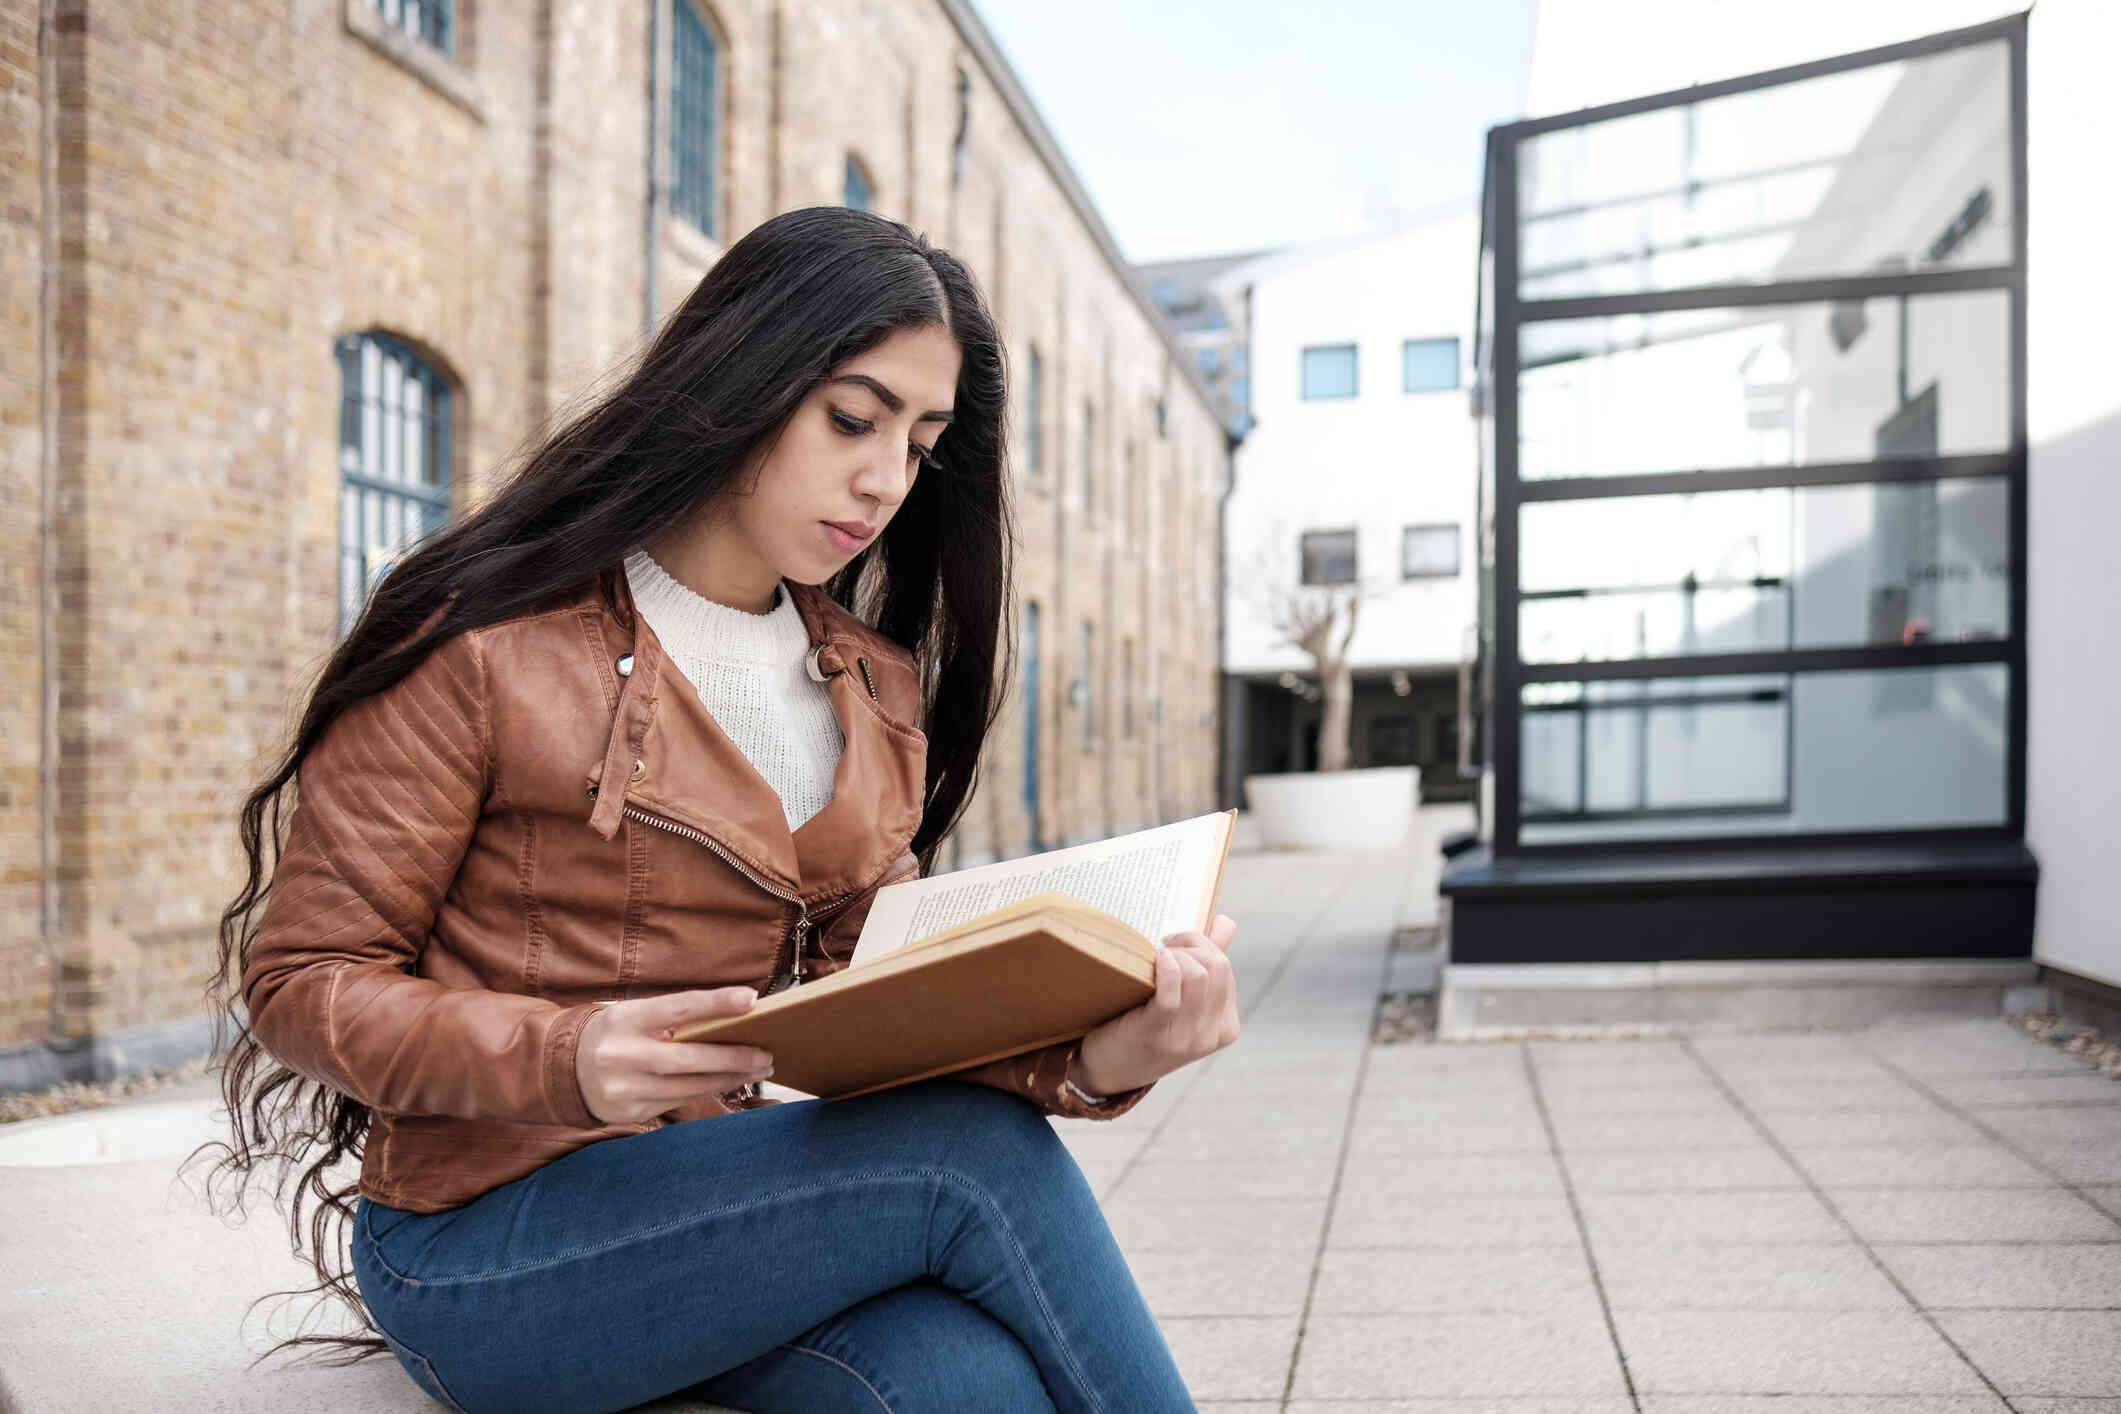 A woman in a brown leather jacket sits outside on a bench and reads from a book.